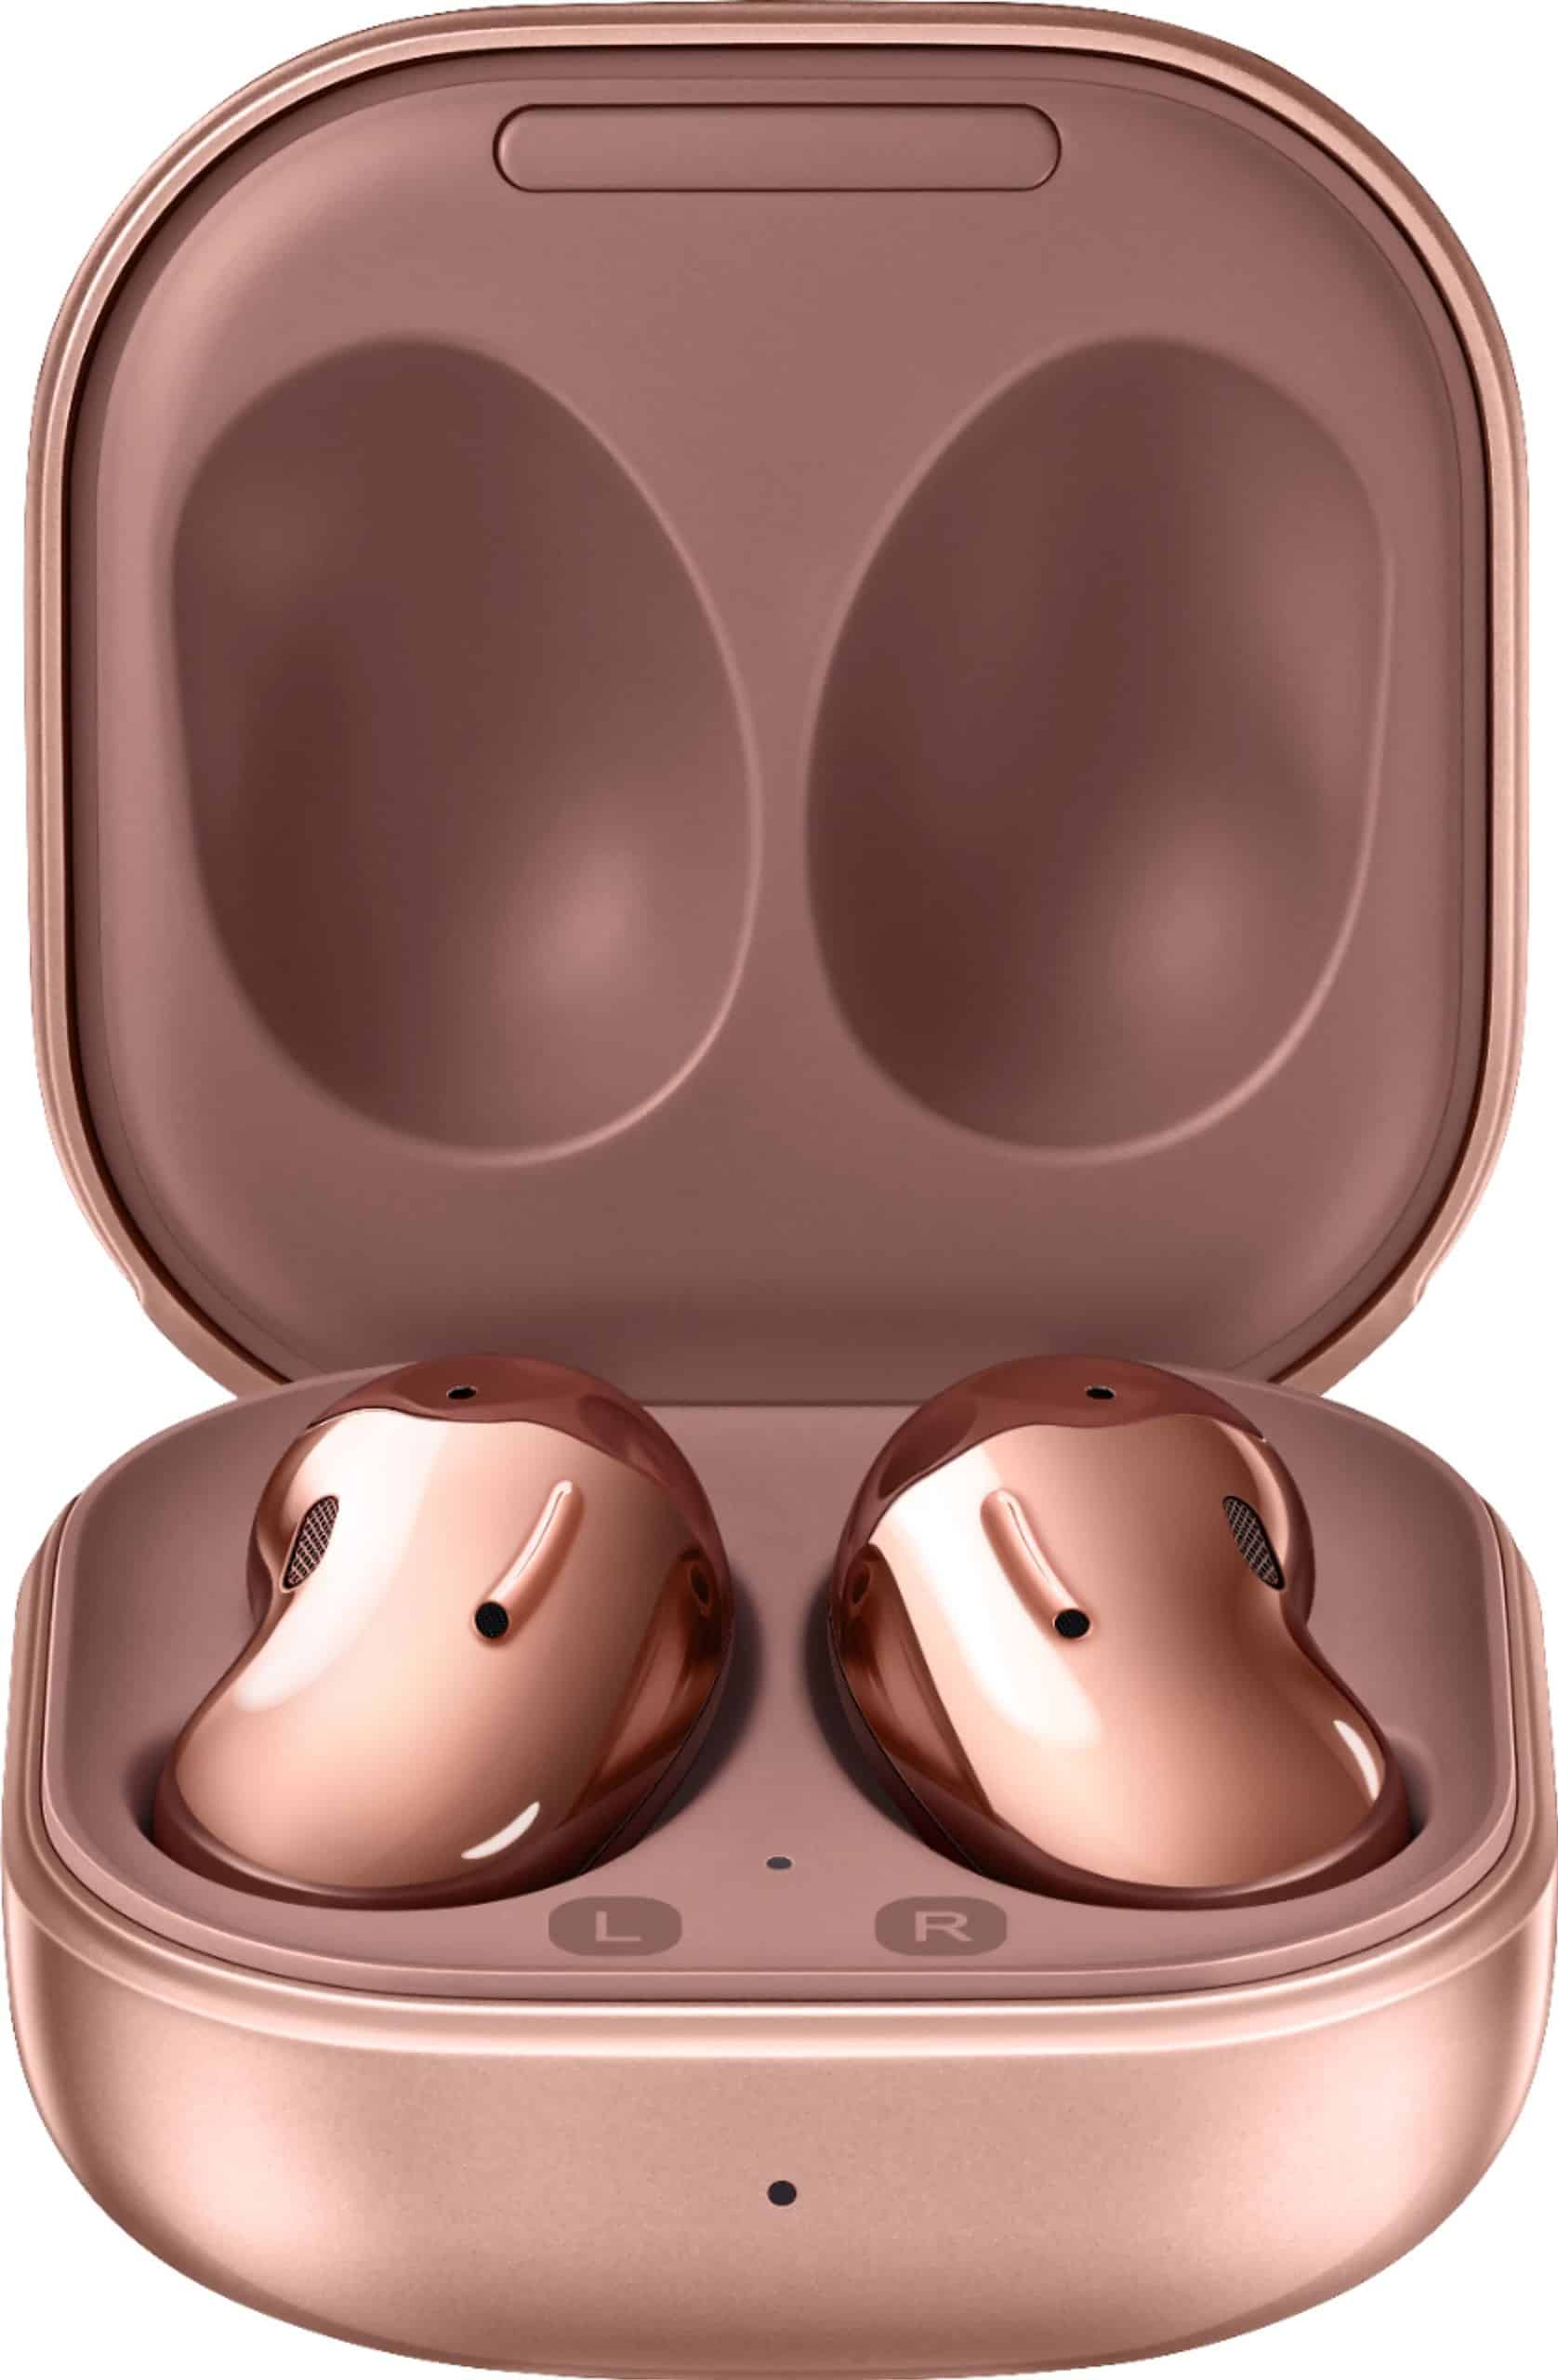 $70 Discount Offer: Samsung Galaxy Buds Live Earbuds